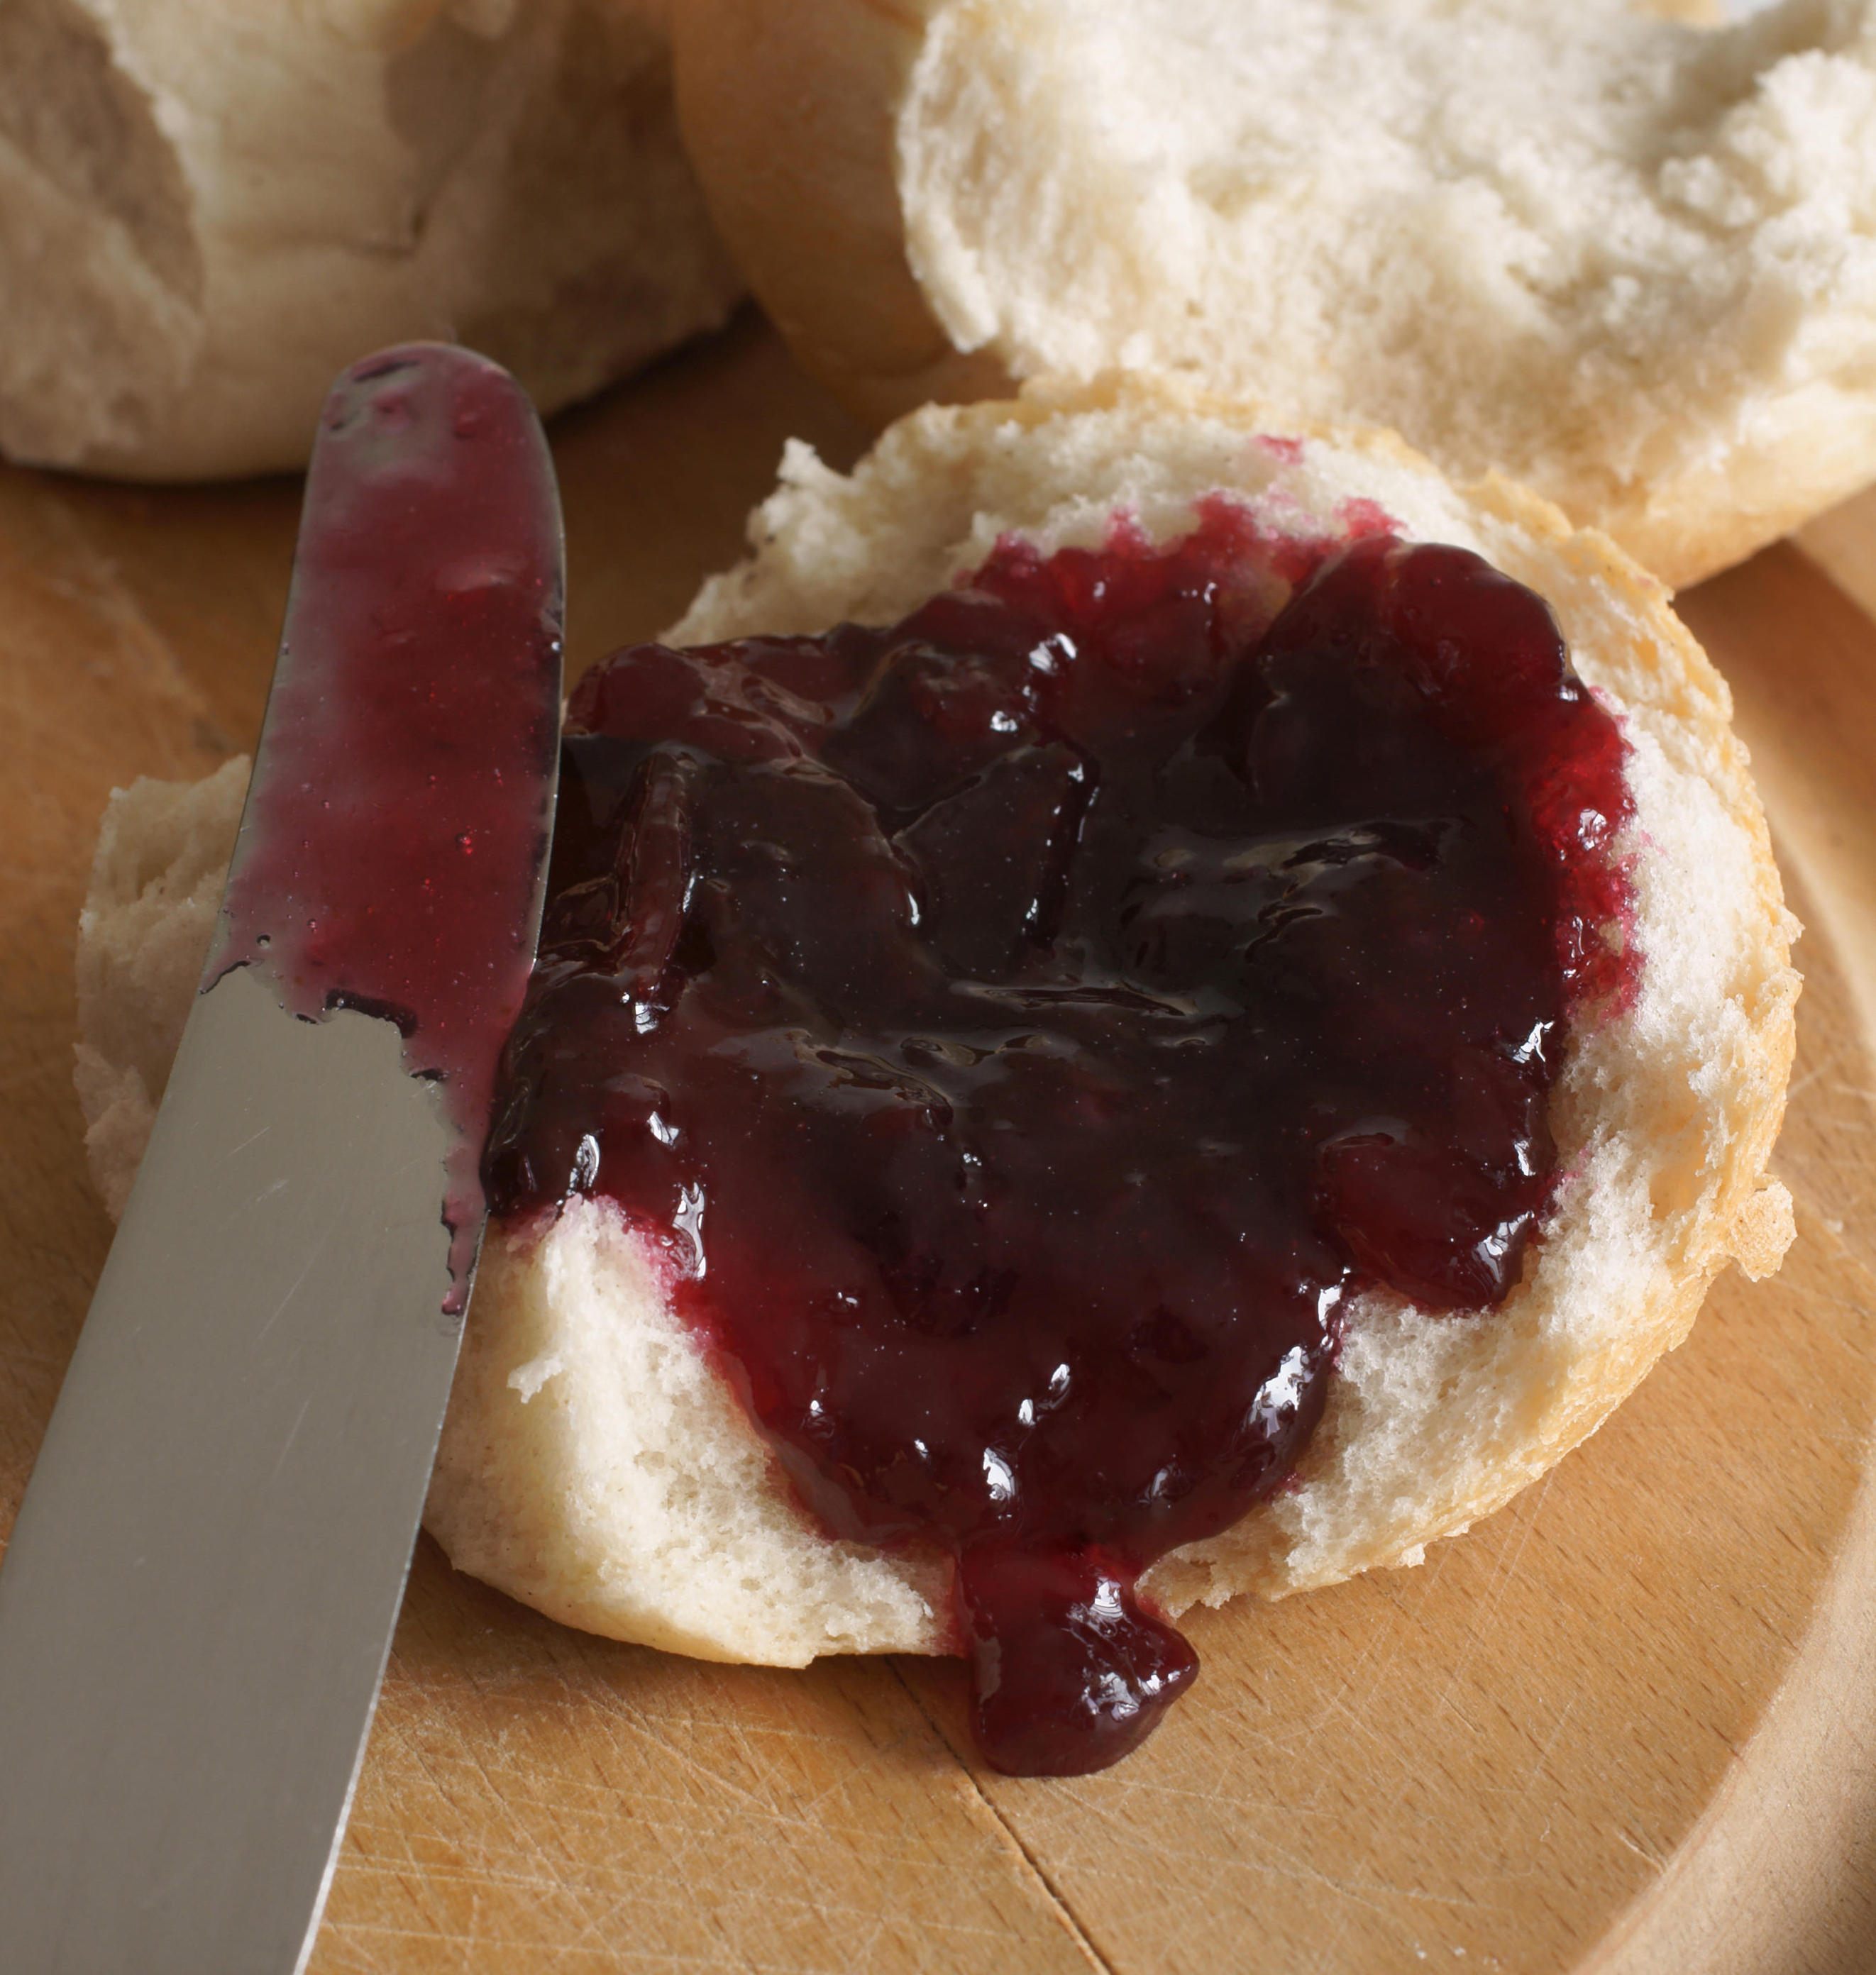 Use any extra damson plum preserves to spread on bread or toast.